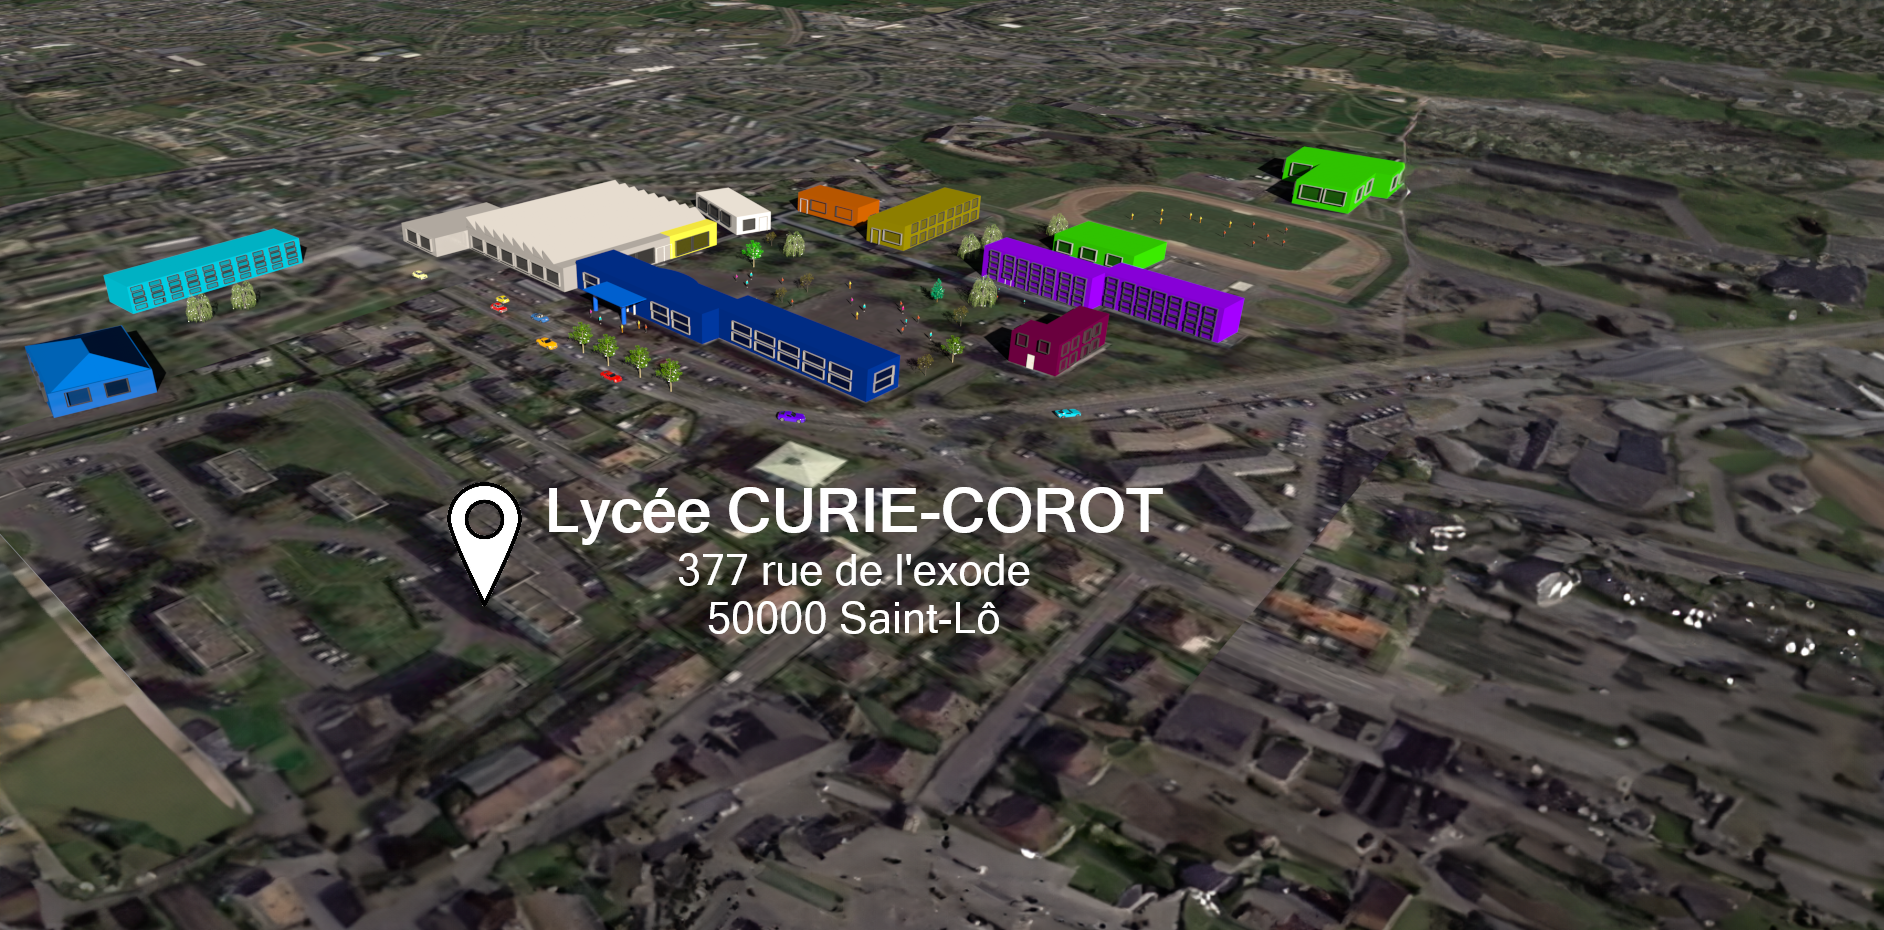 Lycee Curie-Corot